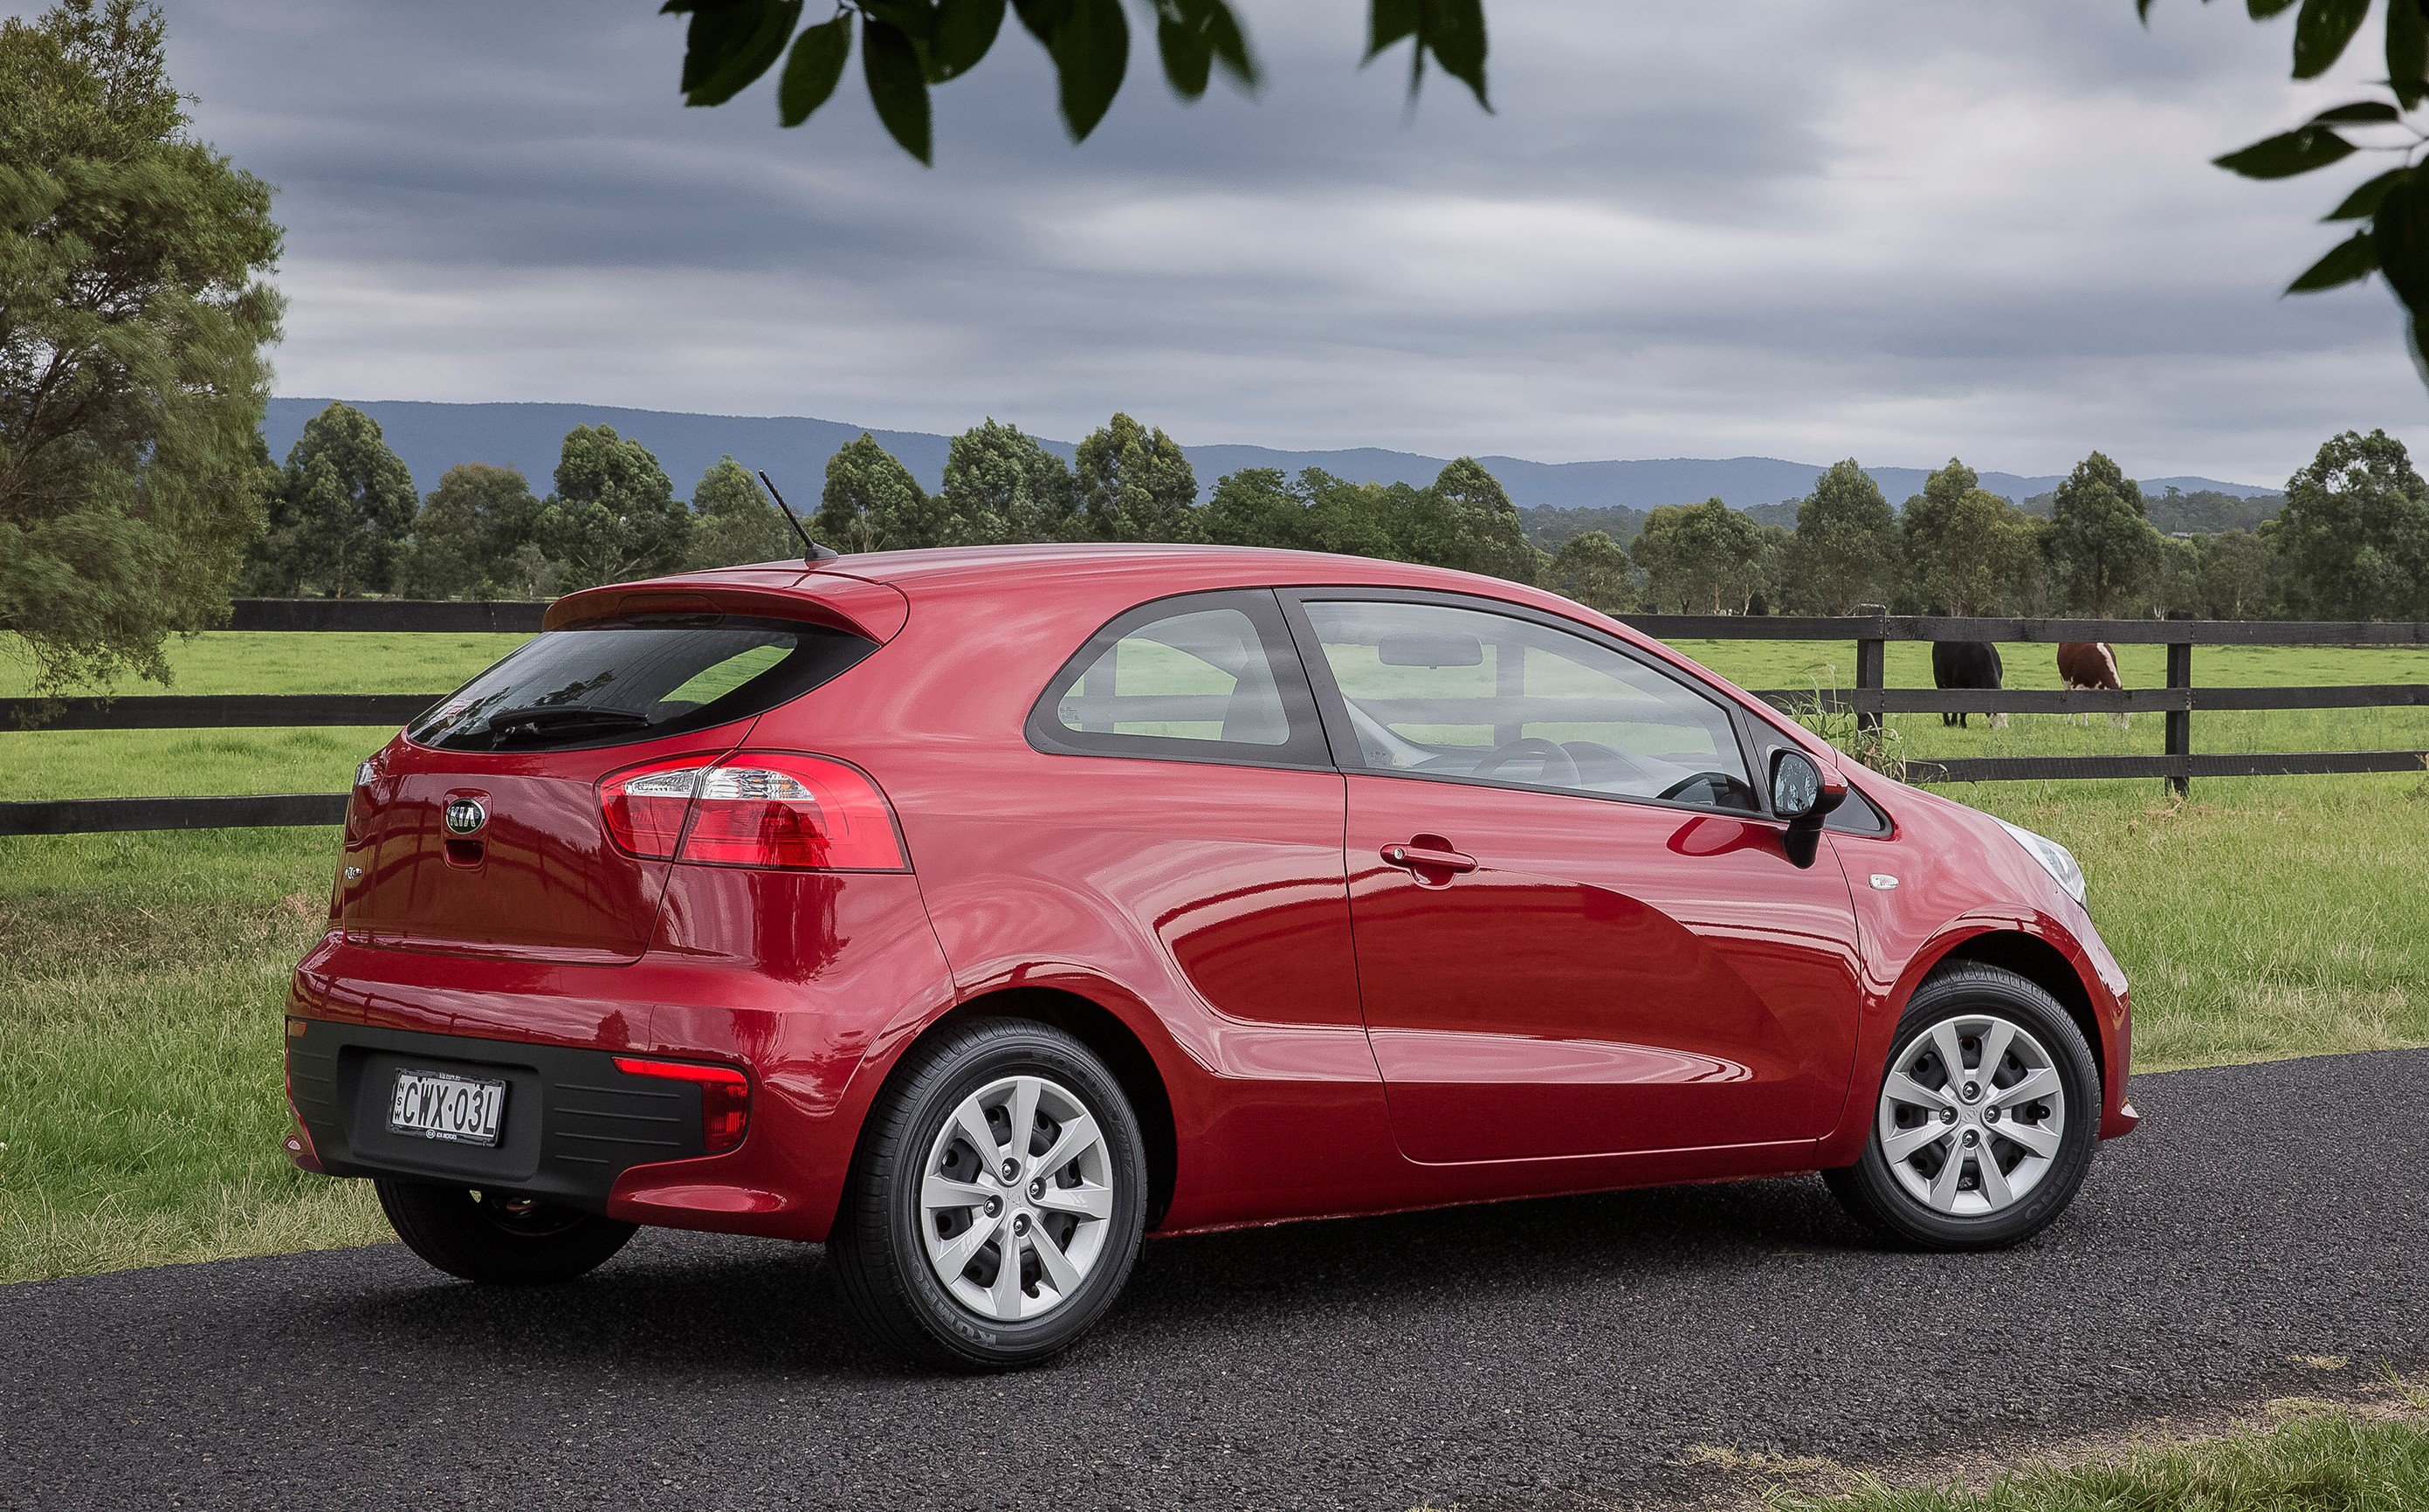 2015 Kia Rio Pricing and specifications Photos (1 of 4)